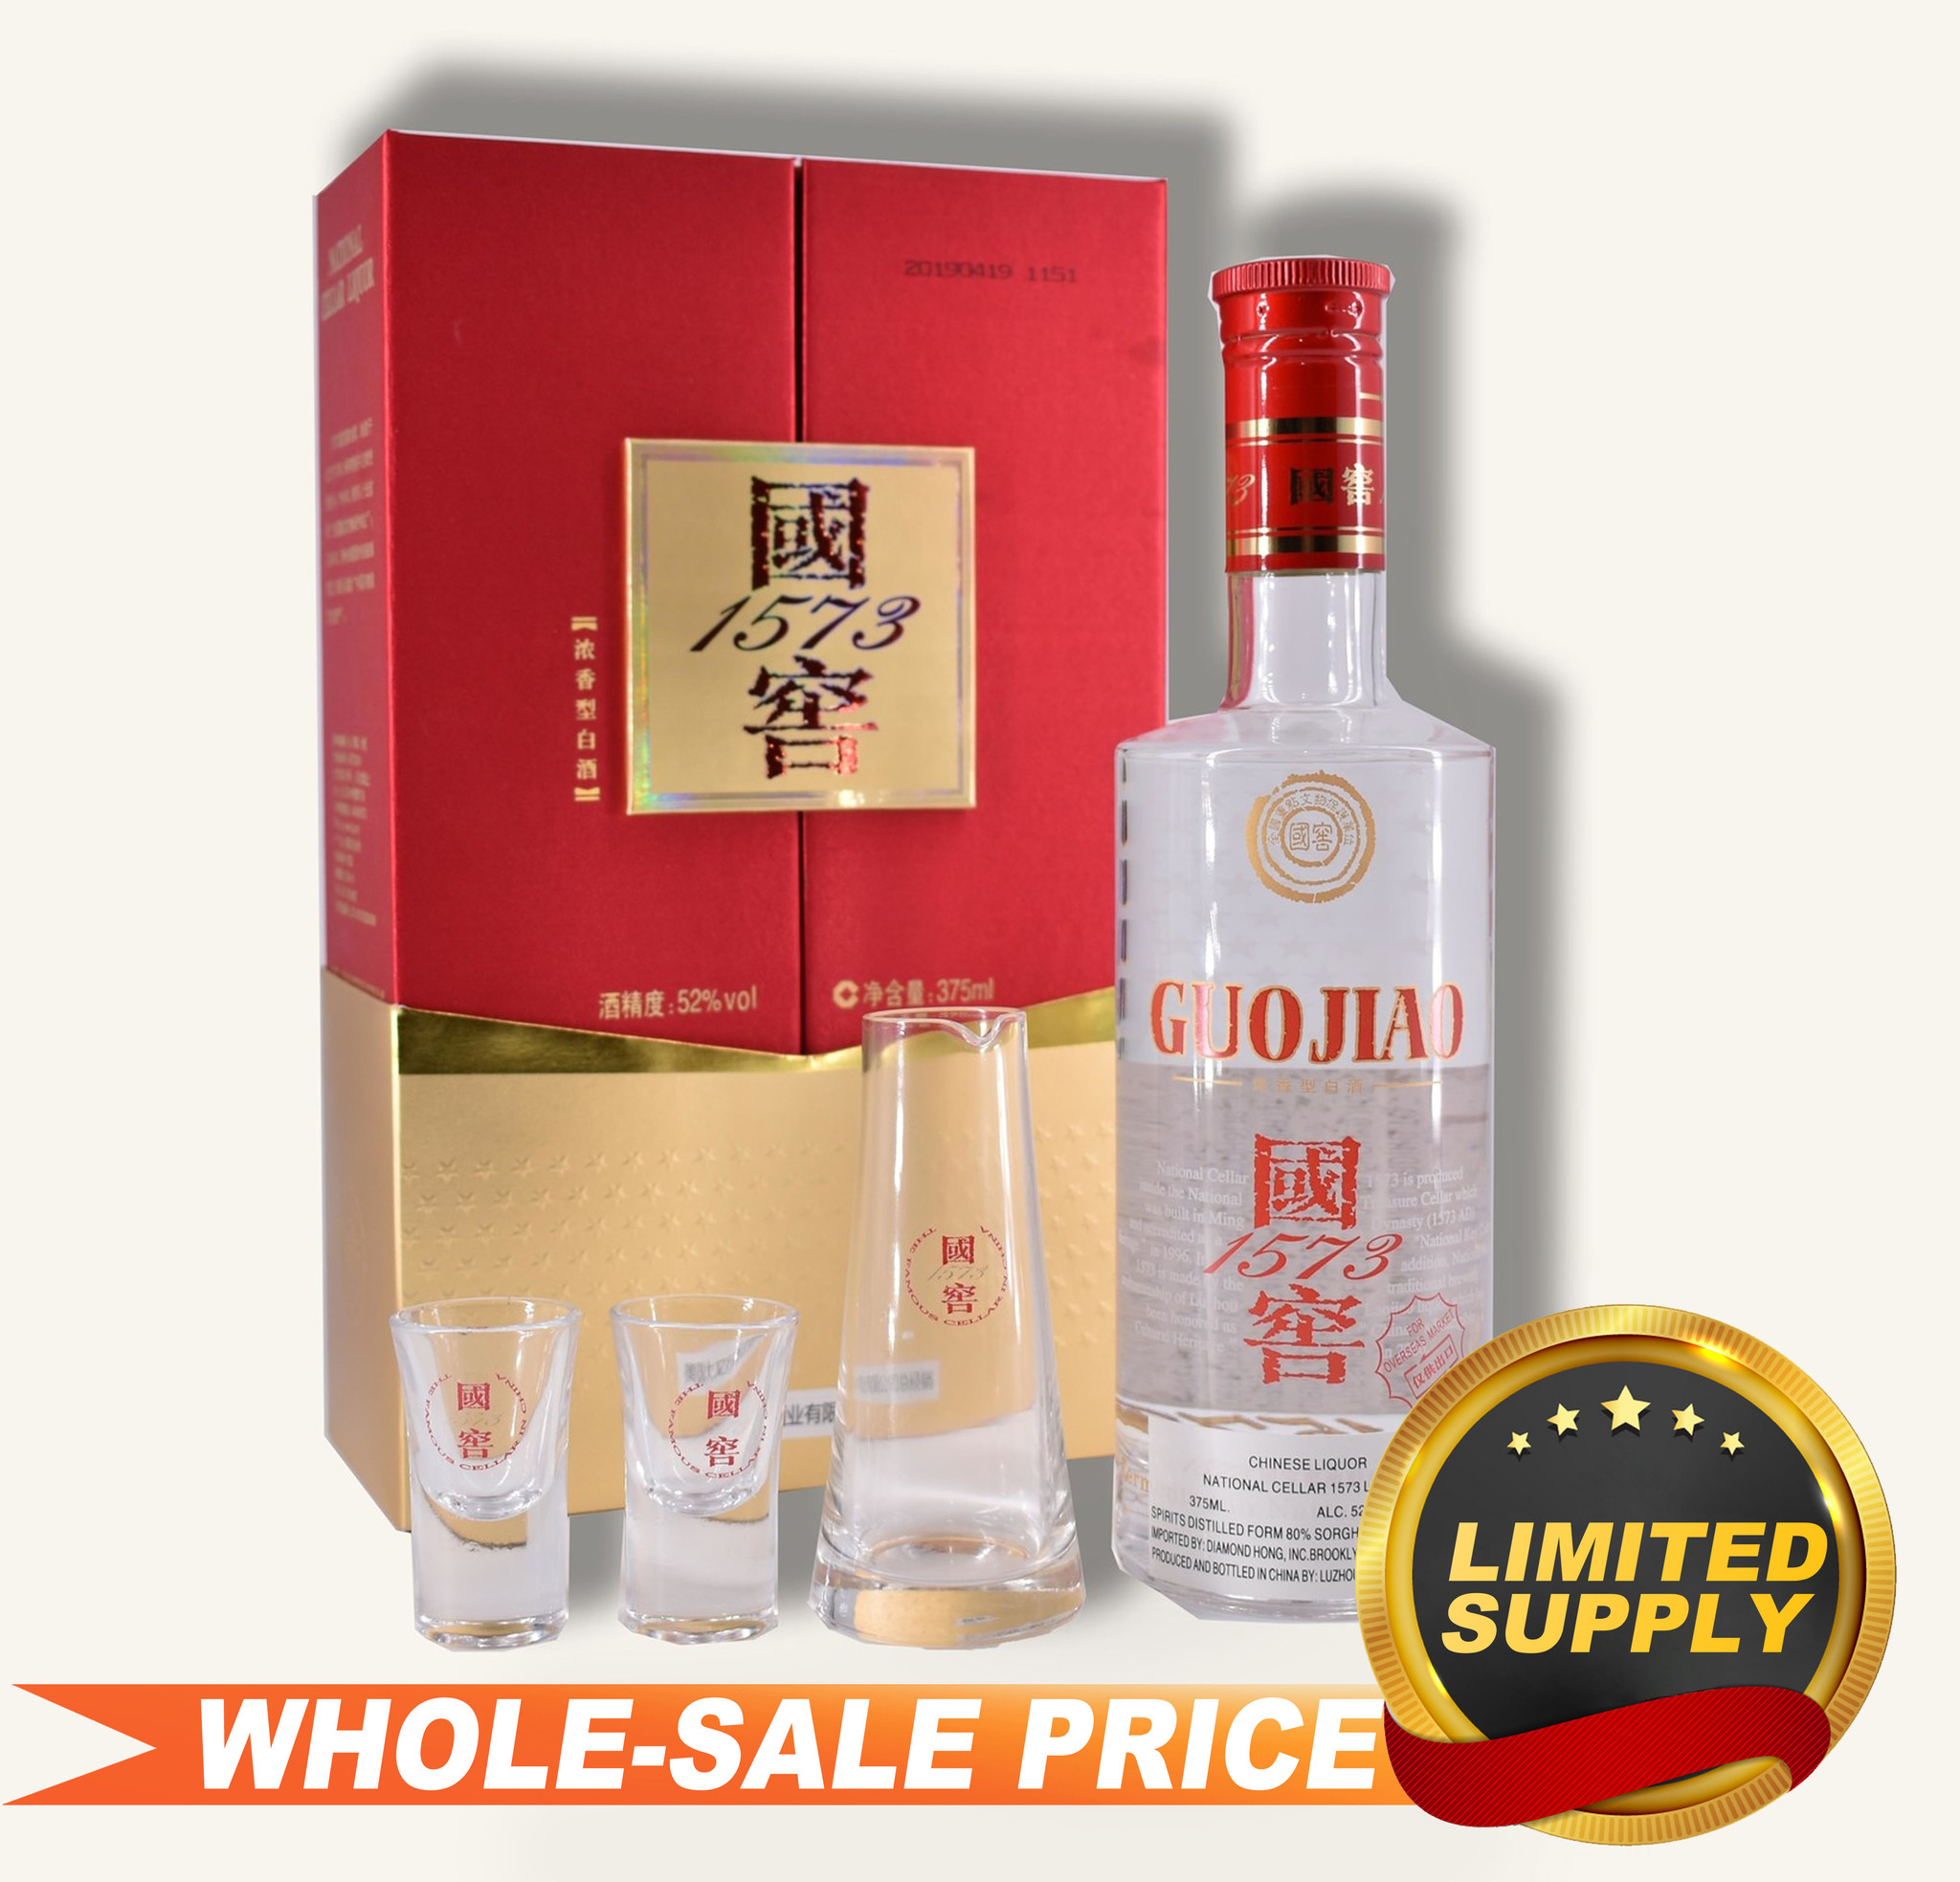 Guo Jiao 国窖1573 Gift Set $121 FREE DELIVERY - Uncle Fossil 